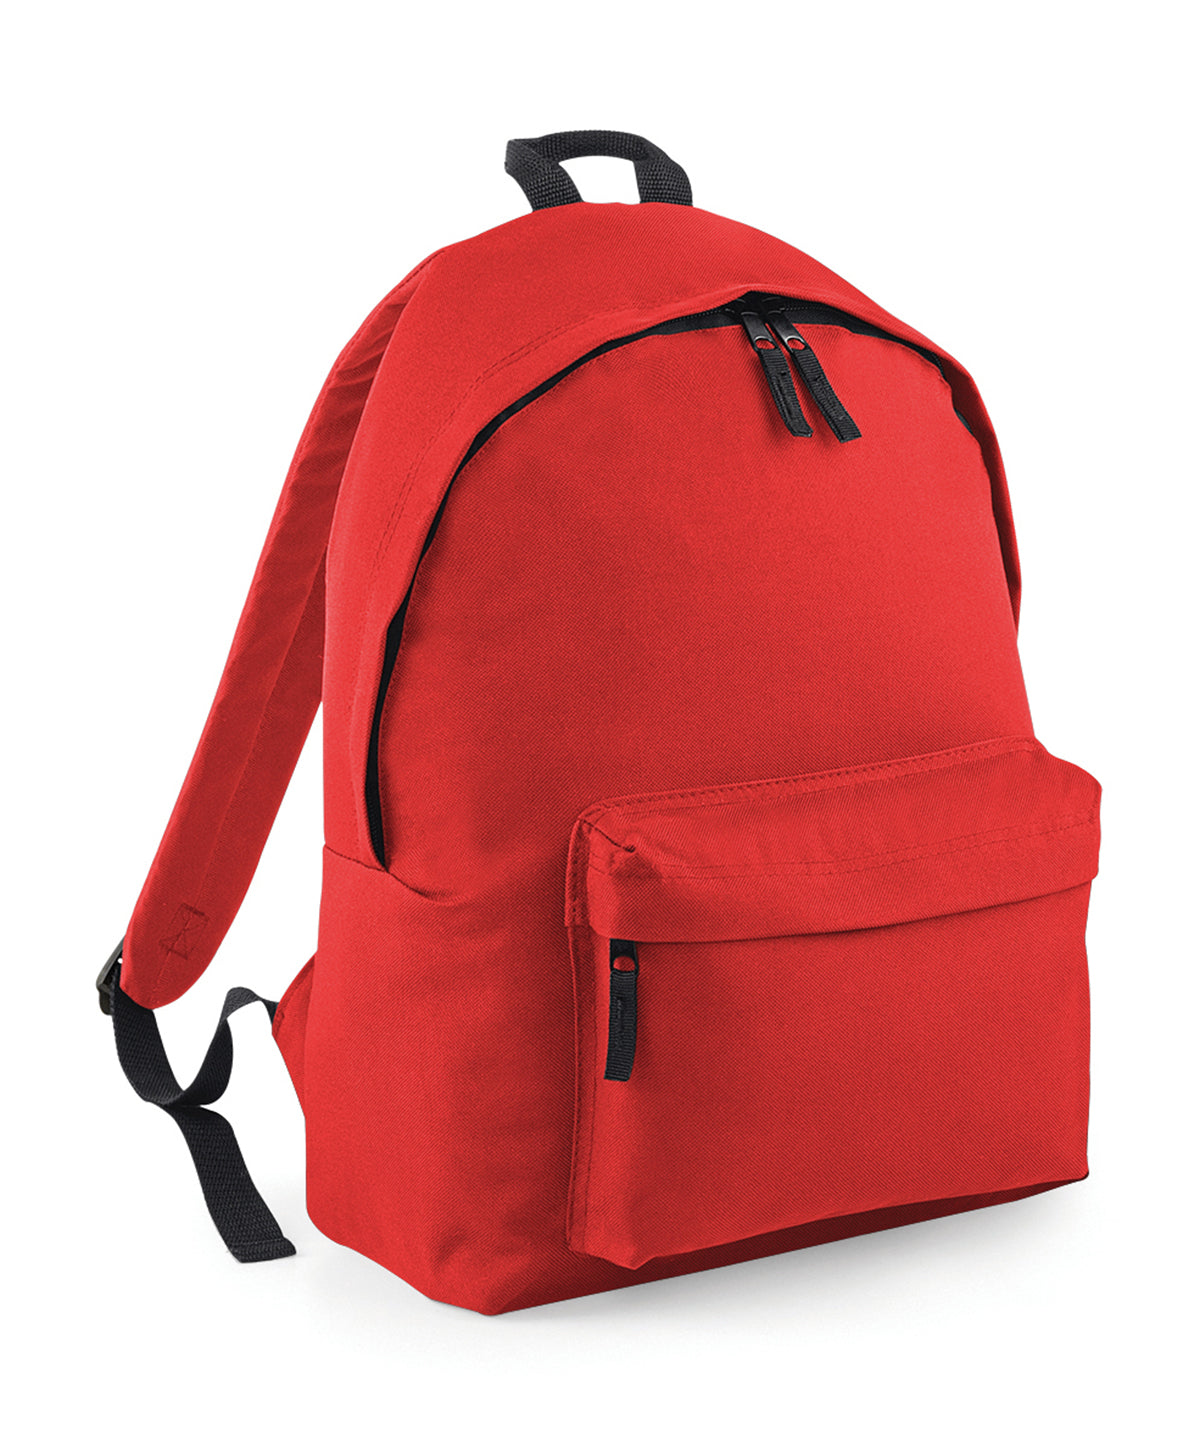 Personalised Bags - Bright Red Bagbase Original fashion backpack